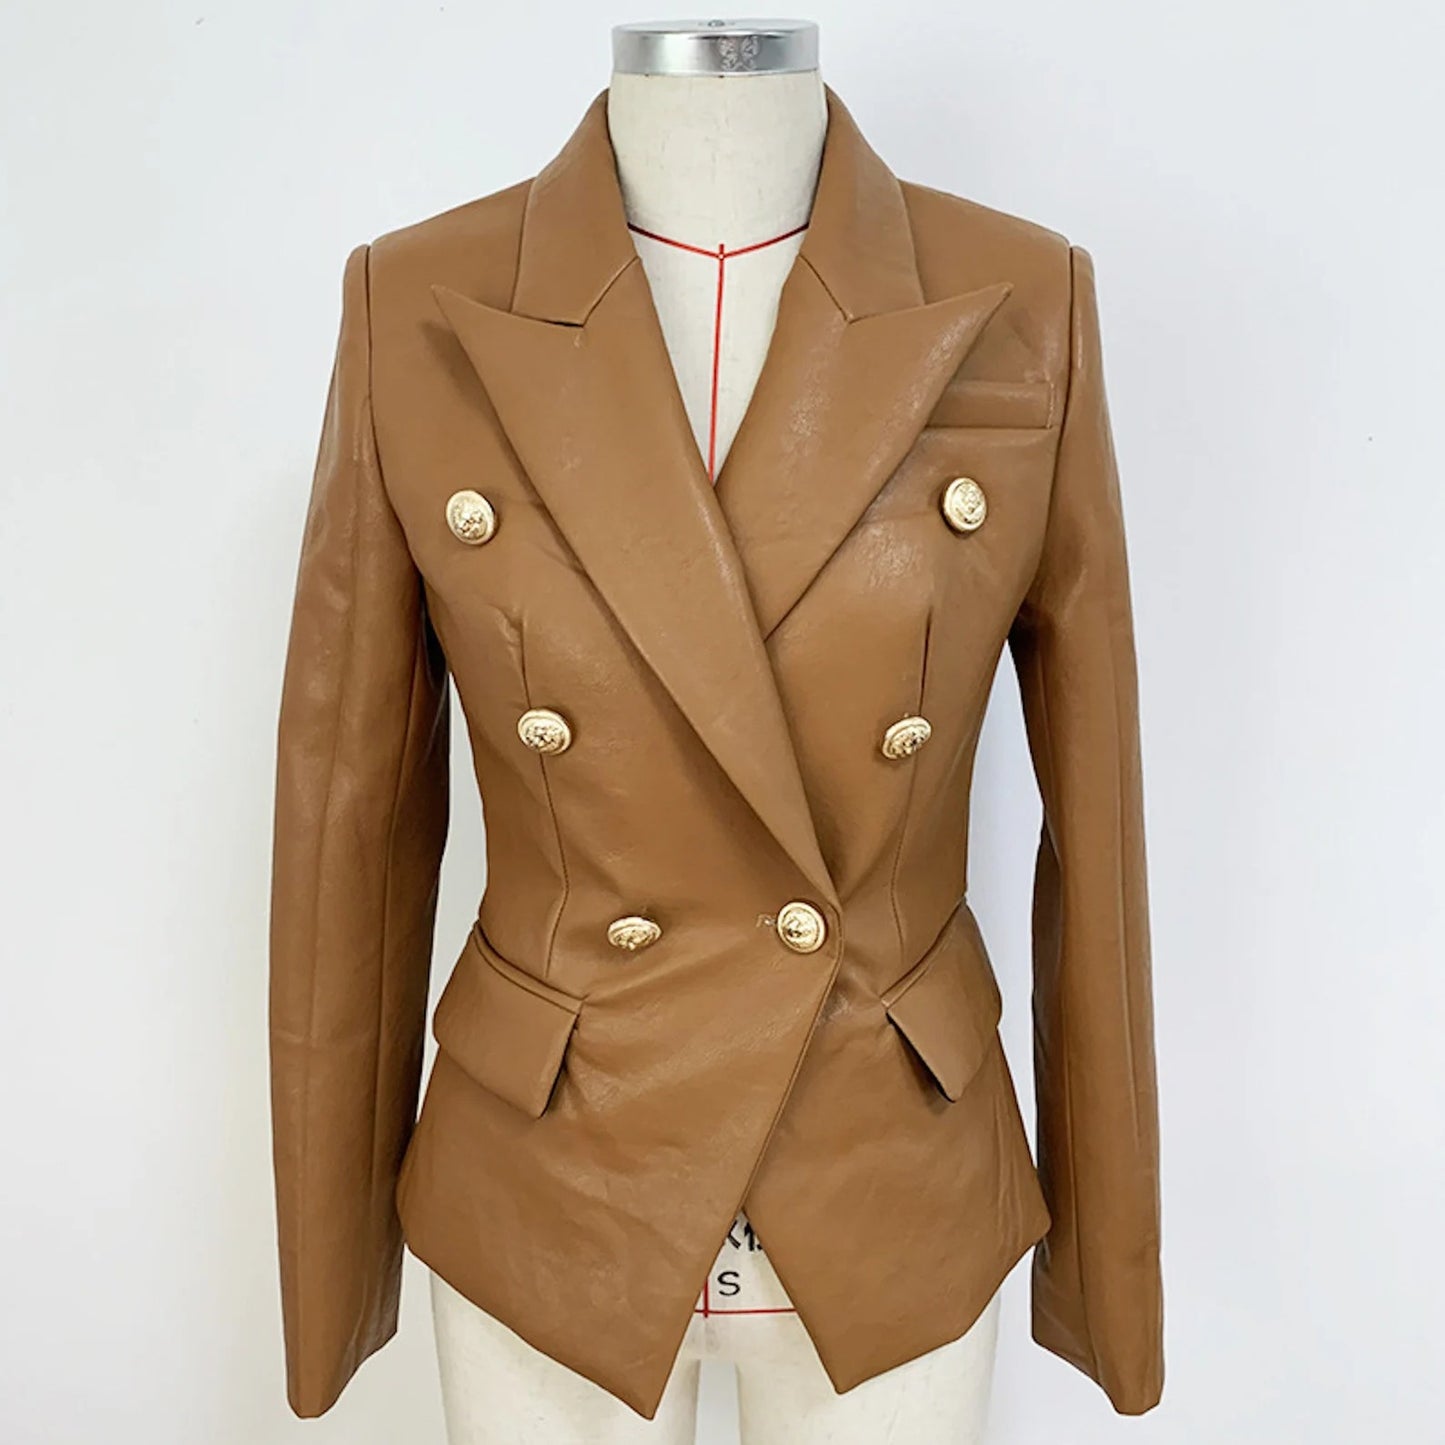 Women's Fitted Faux Leather Brown Blazer Jacket With Lion Button UK CUSTOMER SERVICE! Women's Fitted Faux Leather Brown Blazer Jacket With Lion Button - Sturdy, stain-resistant, and importantly more long-lasting, affordable than traditional soft leather. The jacket is easy to care for and with proper maintenance, this fabric will stay looking vivid and new for many year. Dry Clean Only.